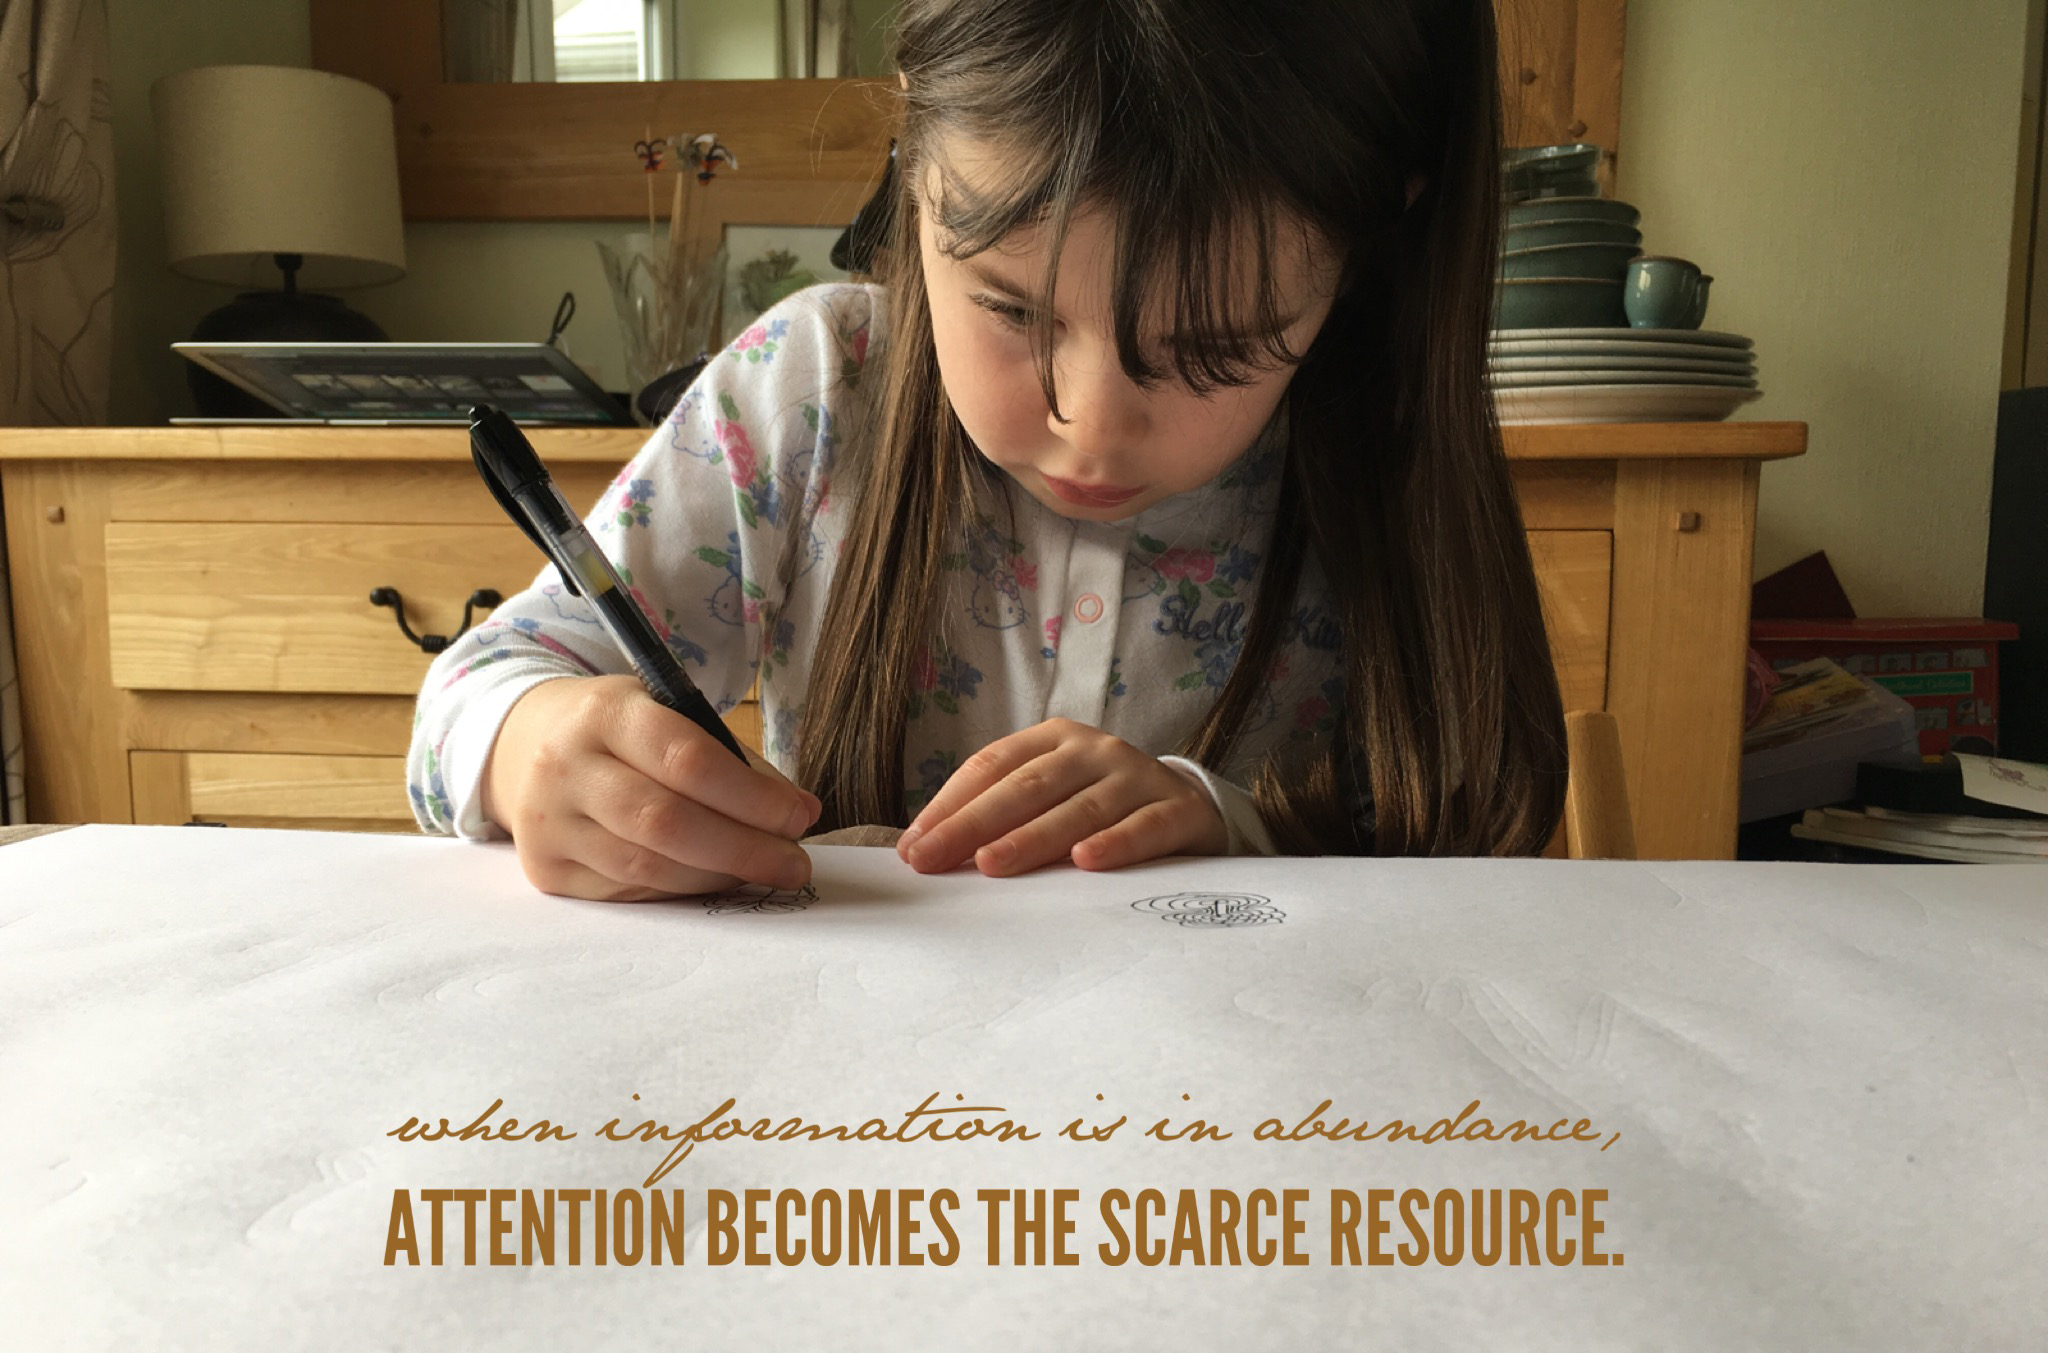 Attention becomes the scarse resource